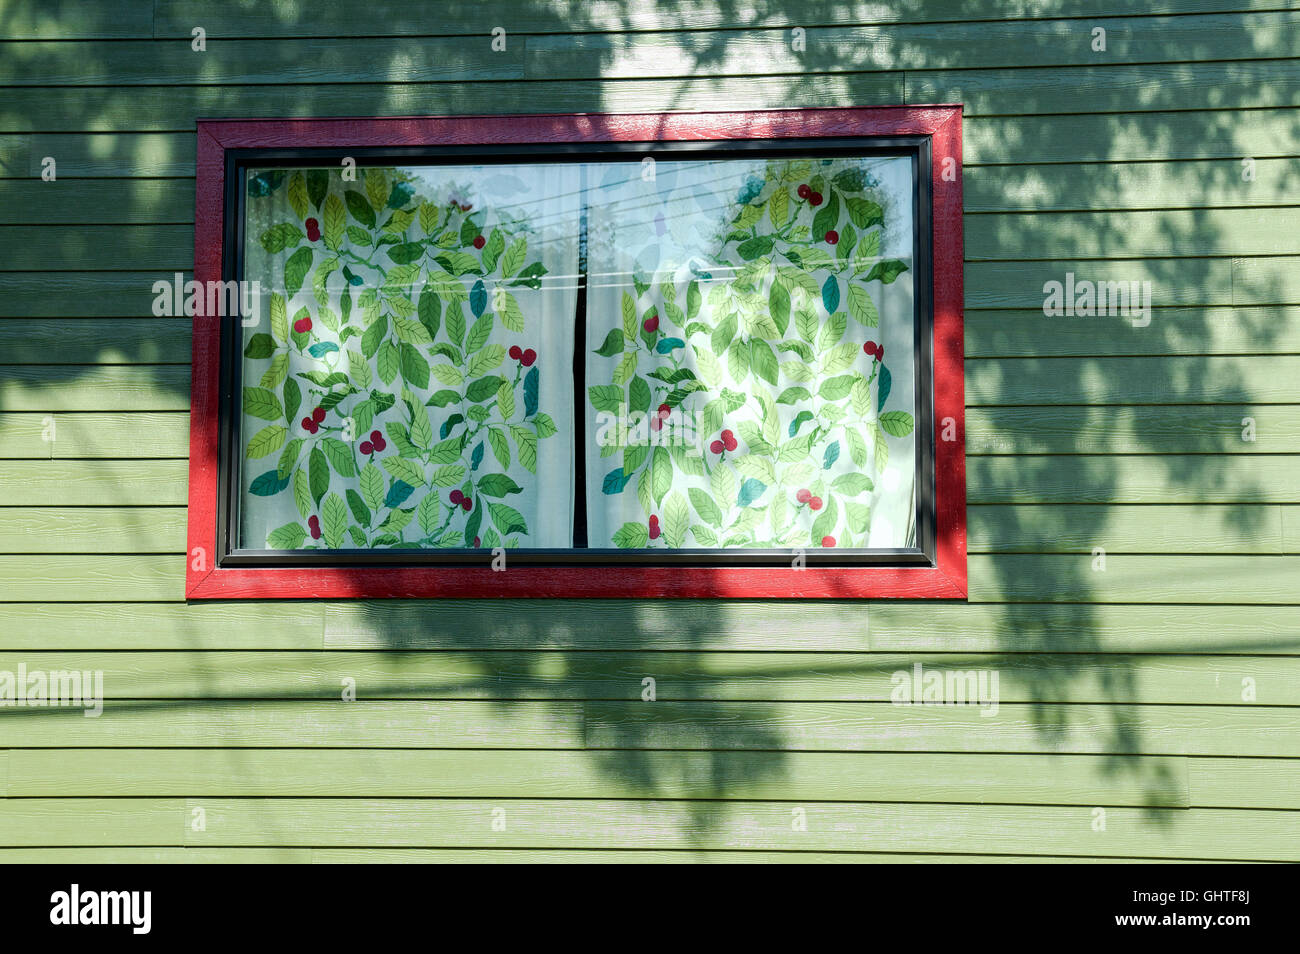 Shadows of foliage over a red-framed window with fabric showing a decorative pattern of flowers, berries and leaves Stock Photo